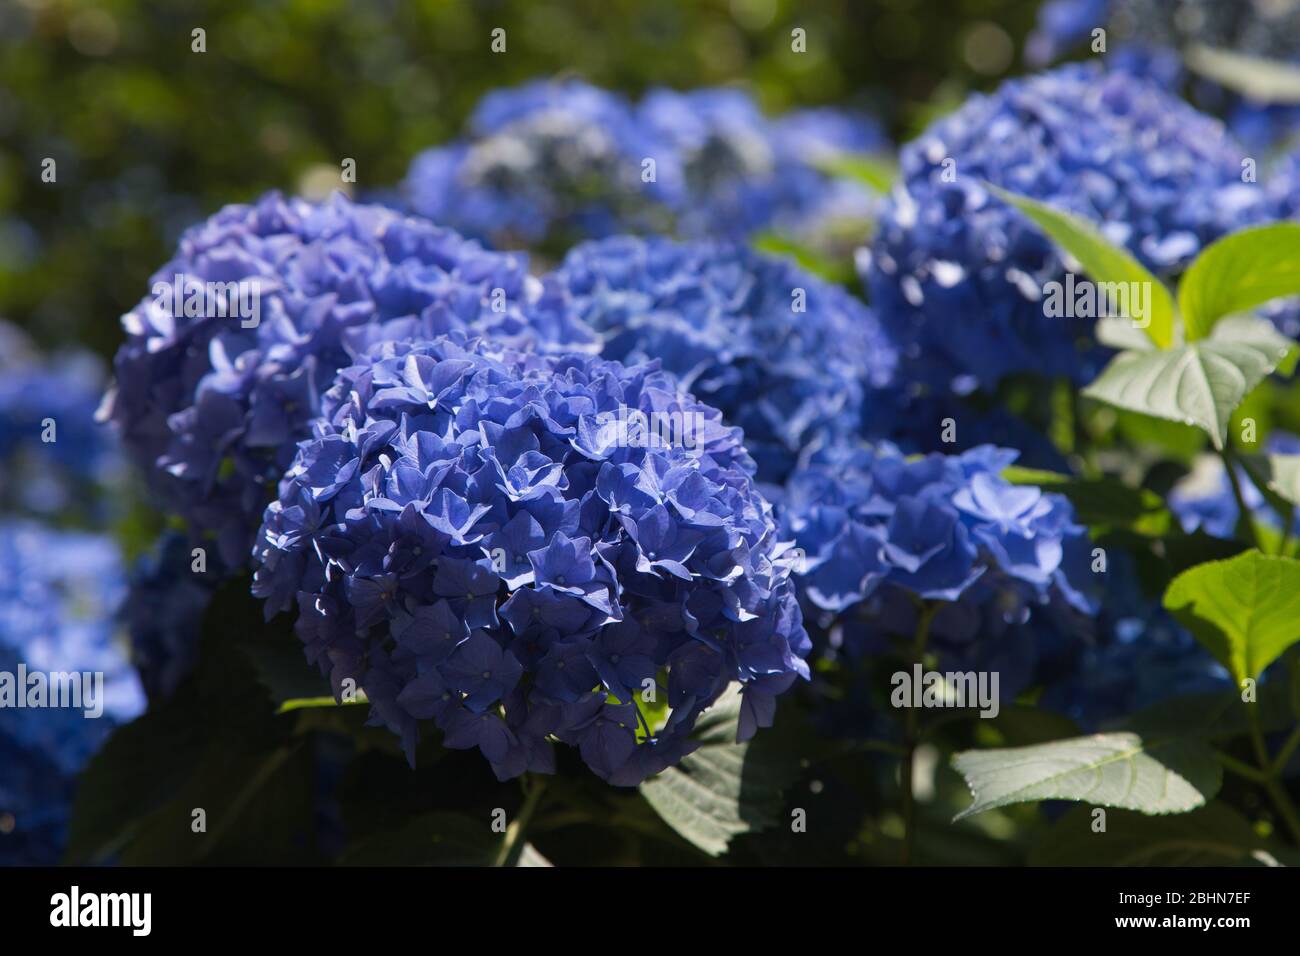 Close up of a blue hydrangea flower. Hydrangea is a genus of 70–75 species of flowering plants native to Asia and the Americas. Stock Photo